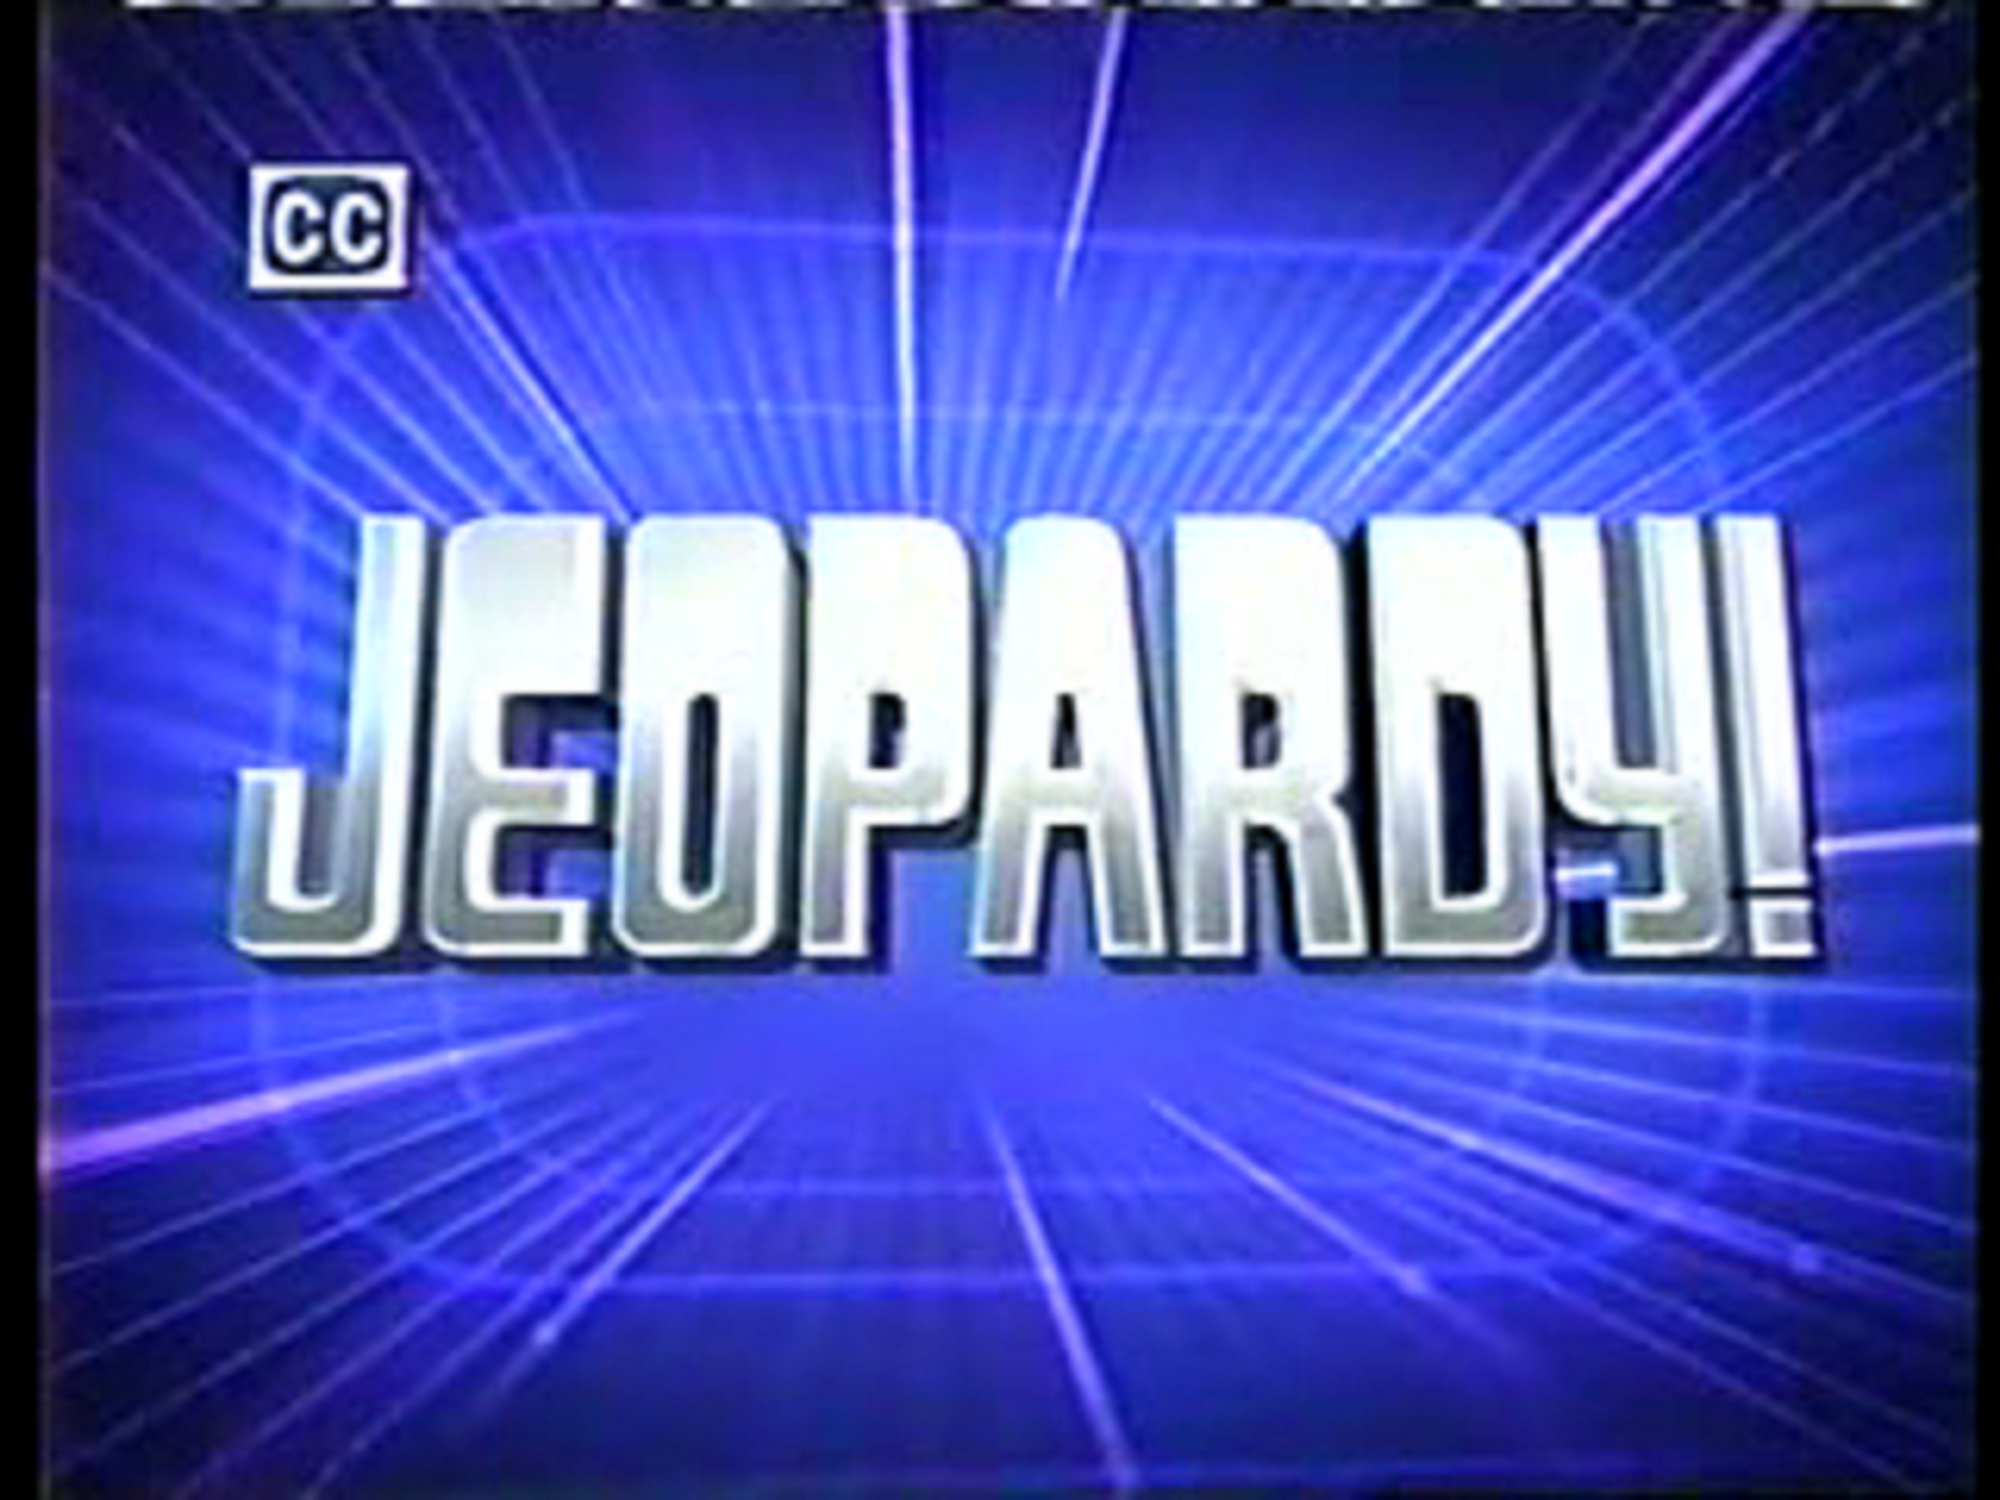 Image - Jeopardy! Season 19 b.png | Game Shows Wiki | FANDOM powered by